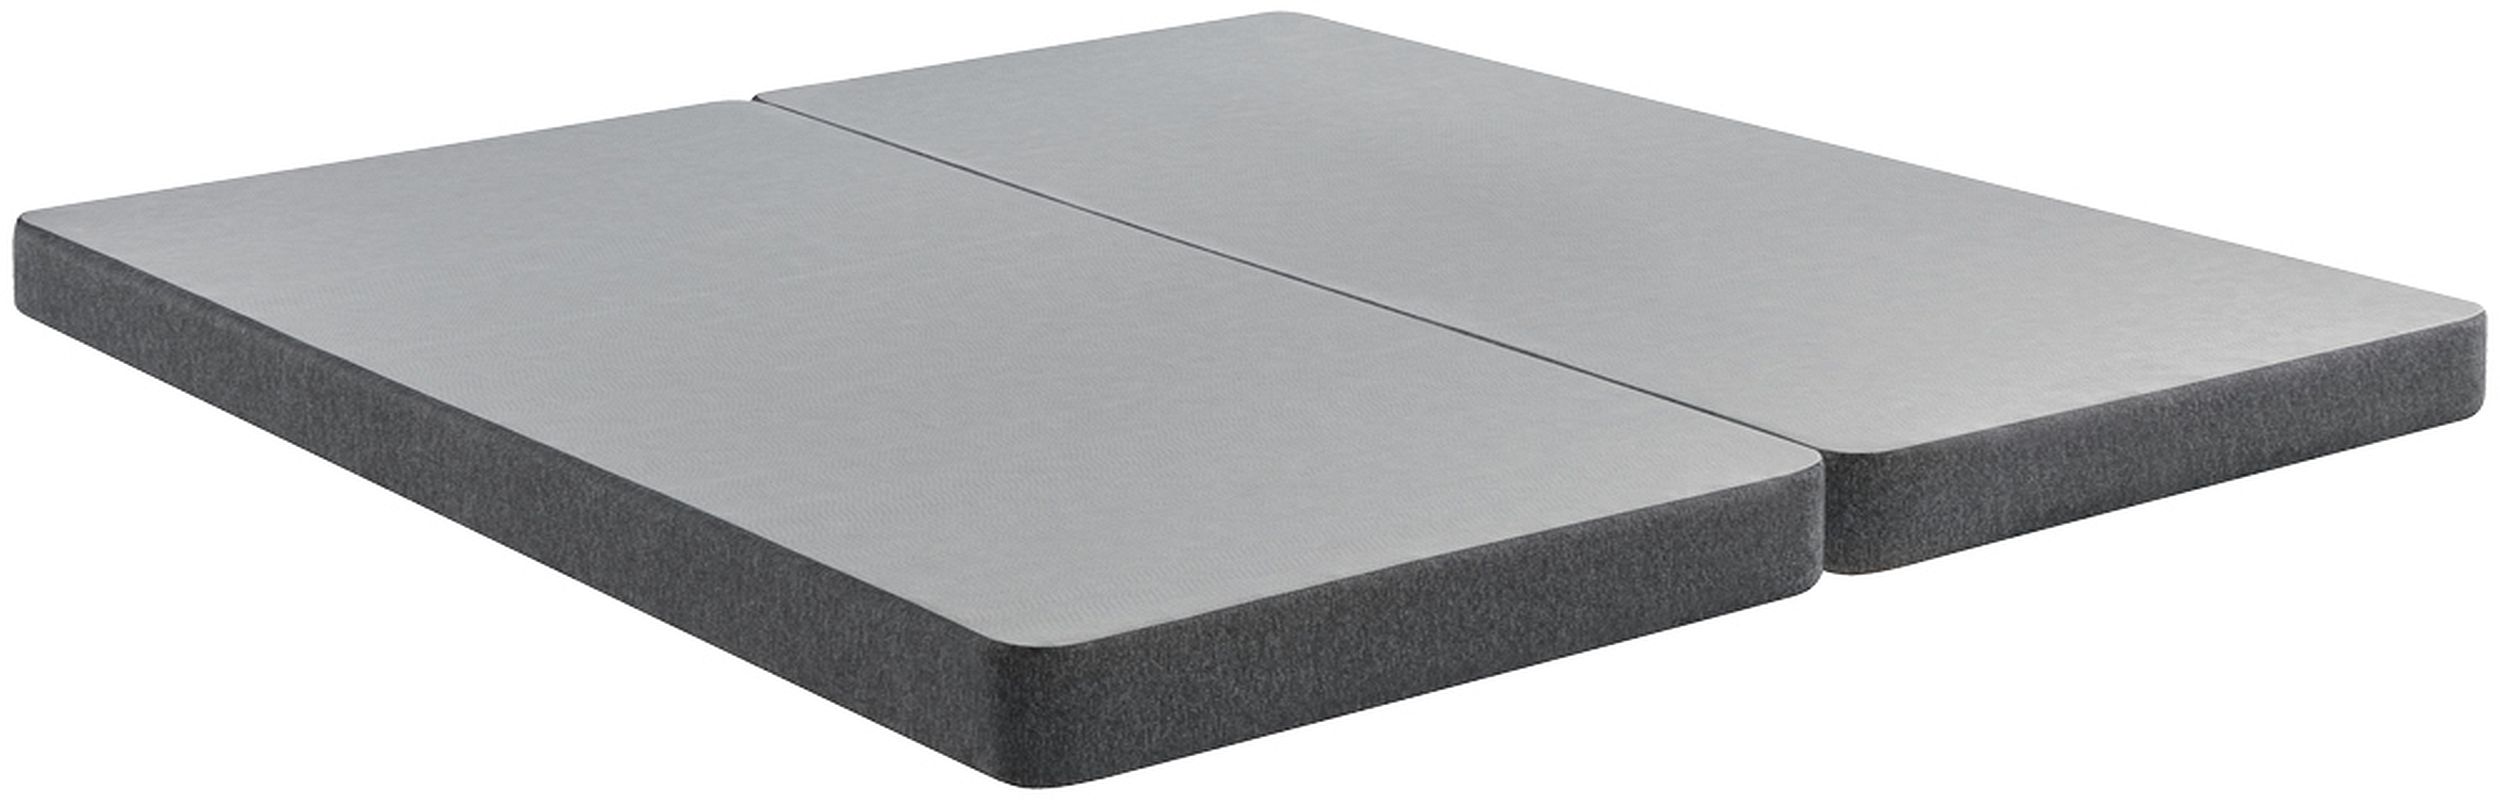 Beautyrest BBK Boxspring Low Profile  California King- 2 needed for Cal King